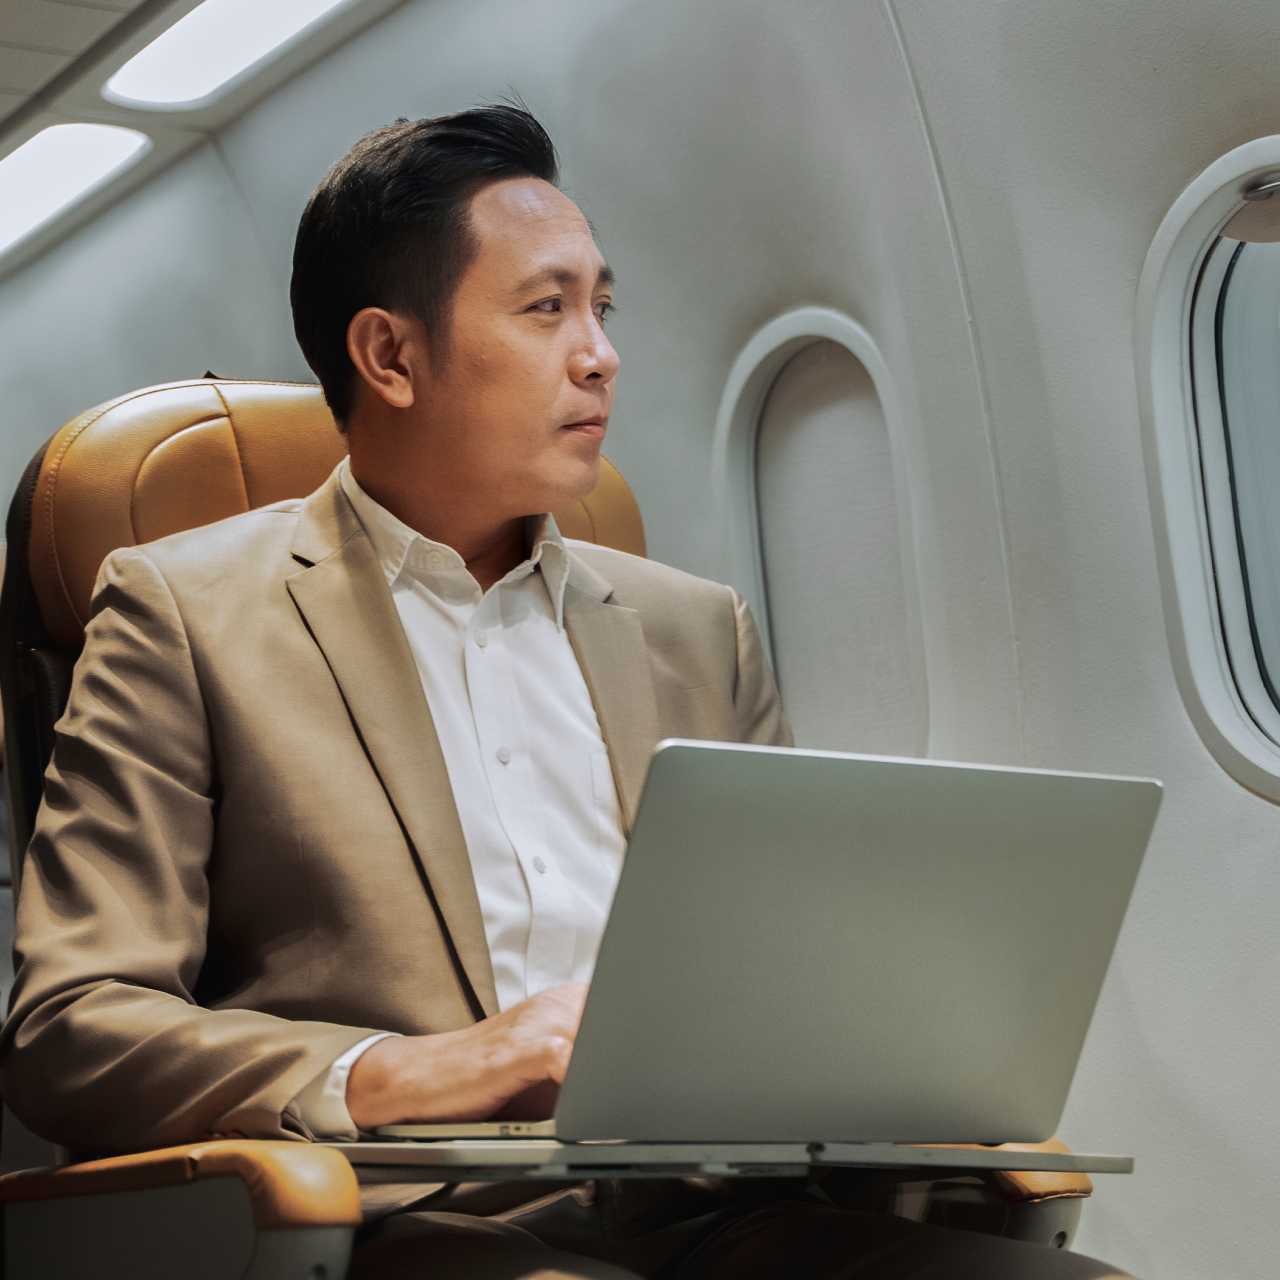 Man sitting on train with laptop out looking out the window